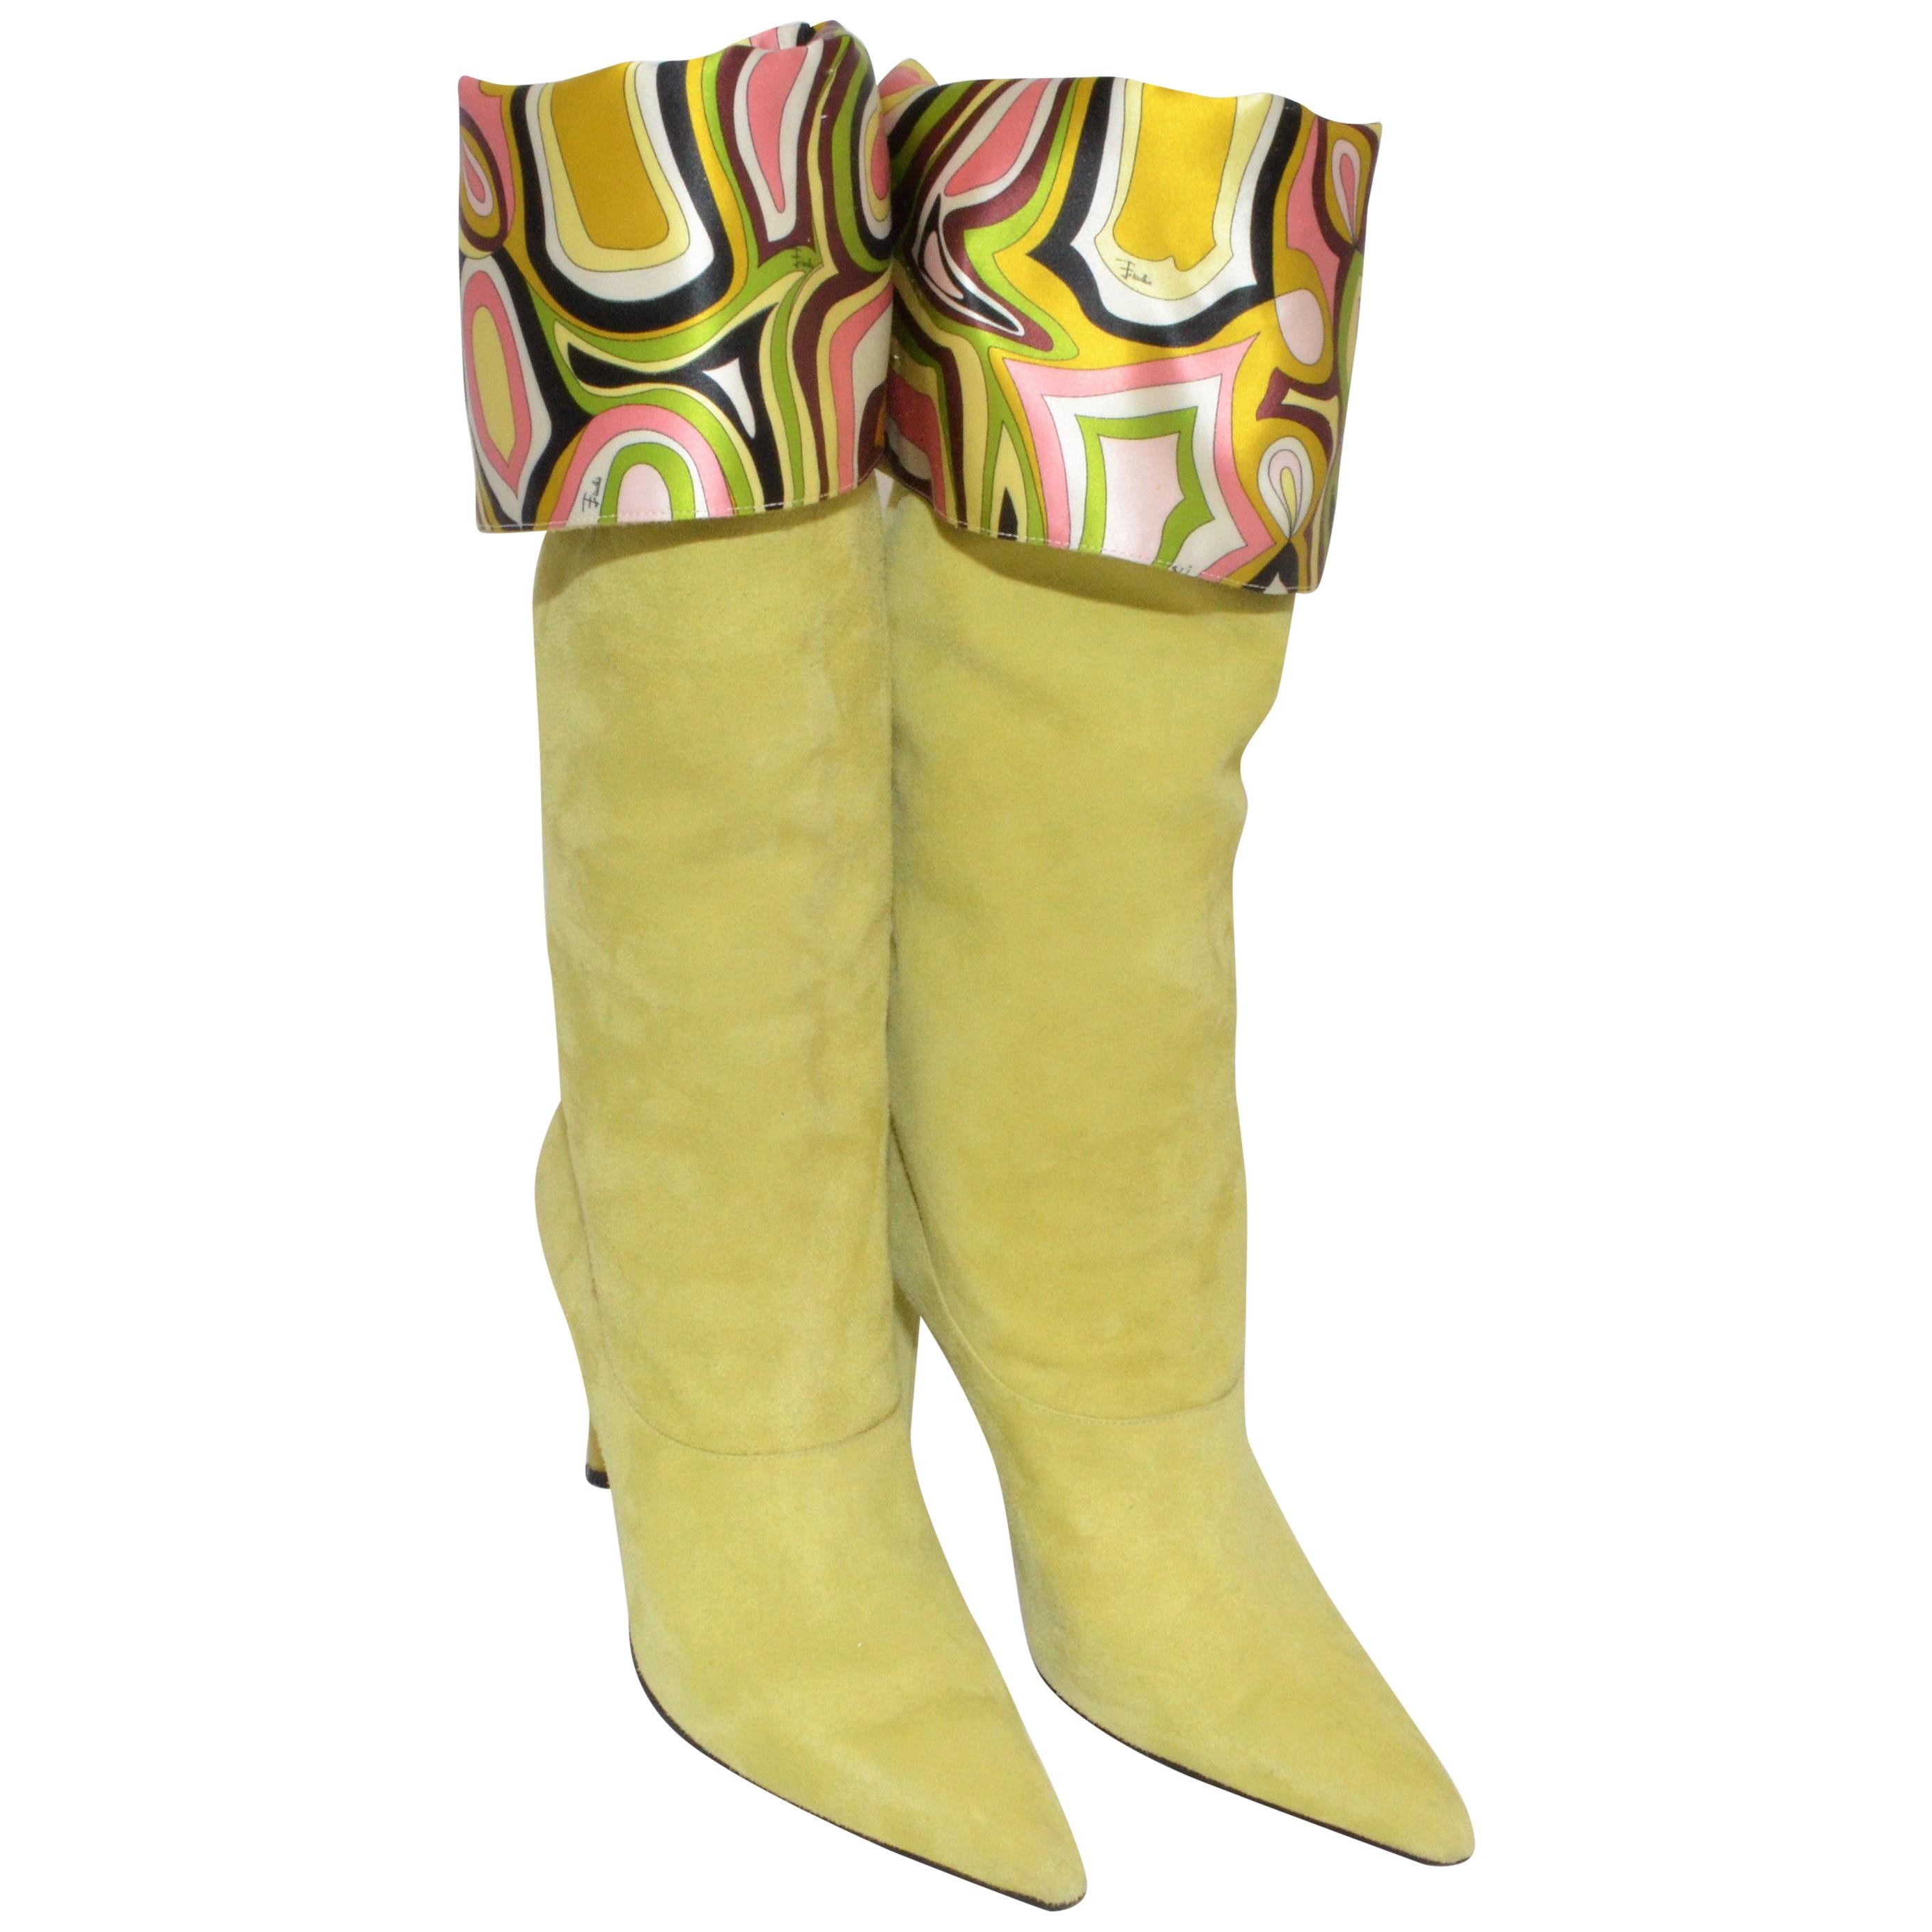 Emilio Pucci Green Suede Boots with Printed Lining 39.5